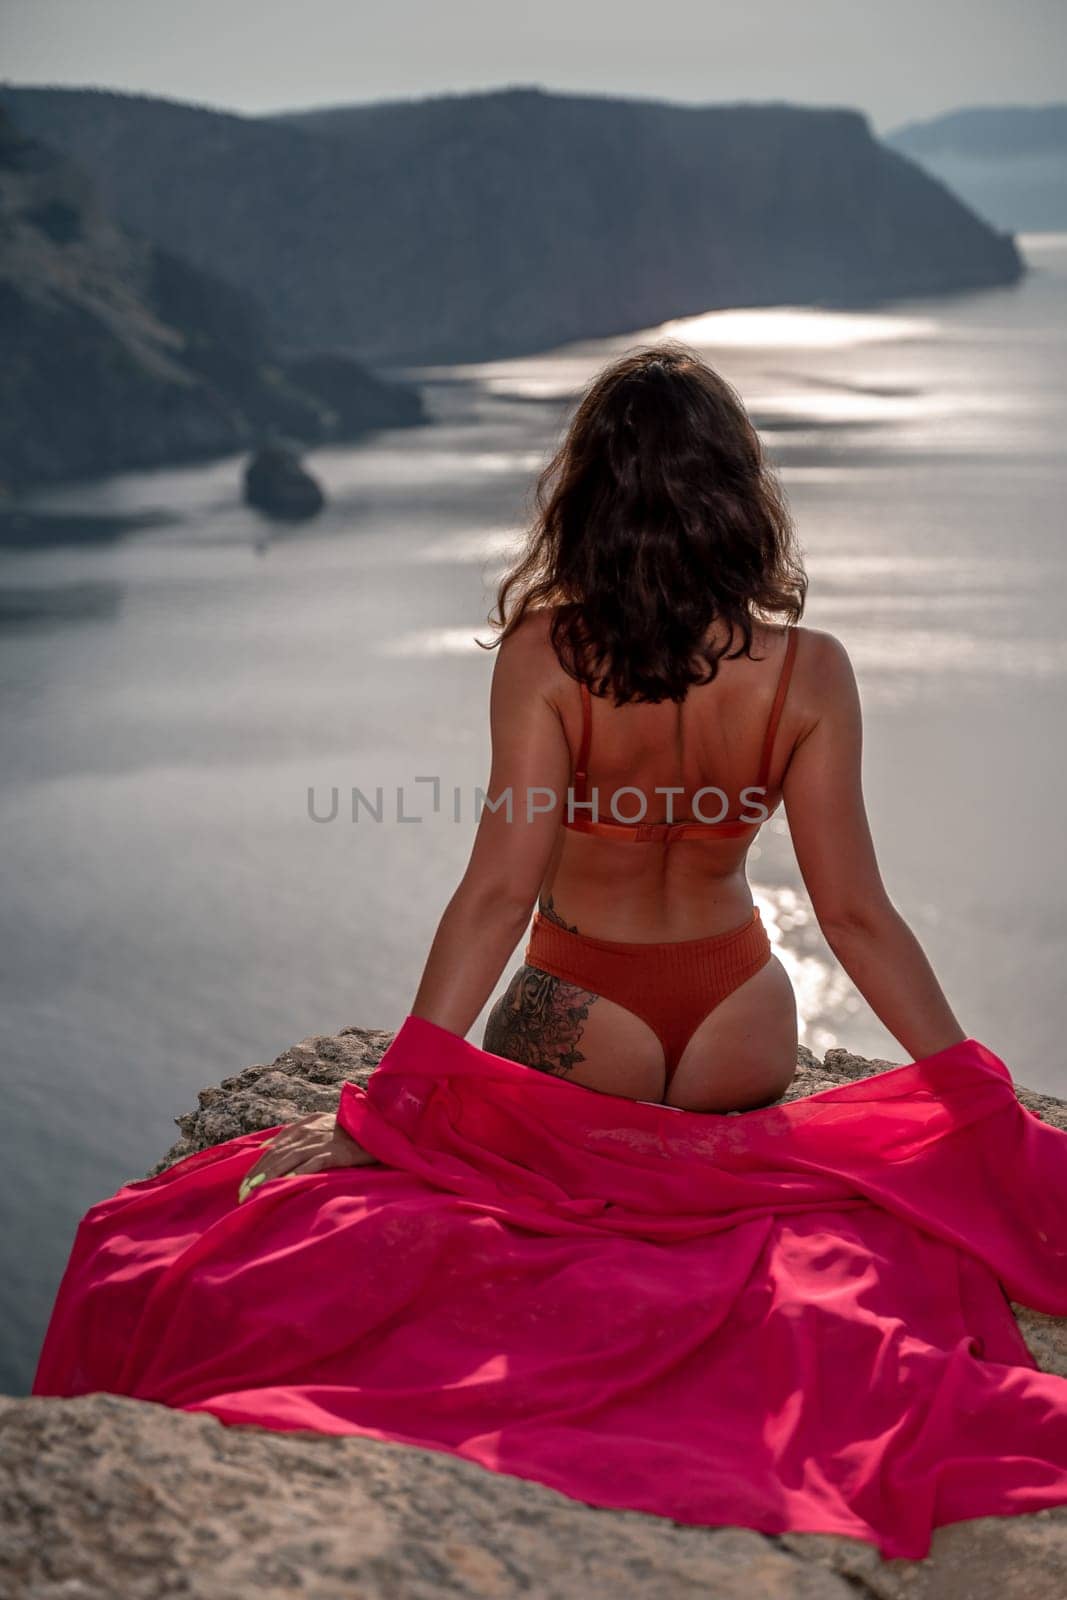 A woman in a red bikini is sitting on a rock overlooking a body of water. The scene is serene and peaceful, with the woman's body language conveying a sense of relaxation and contentment. by Matiunina